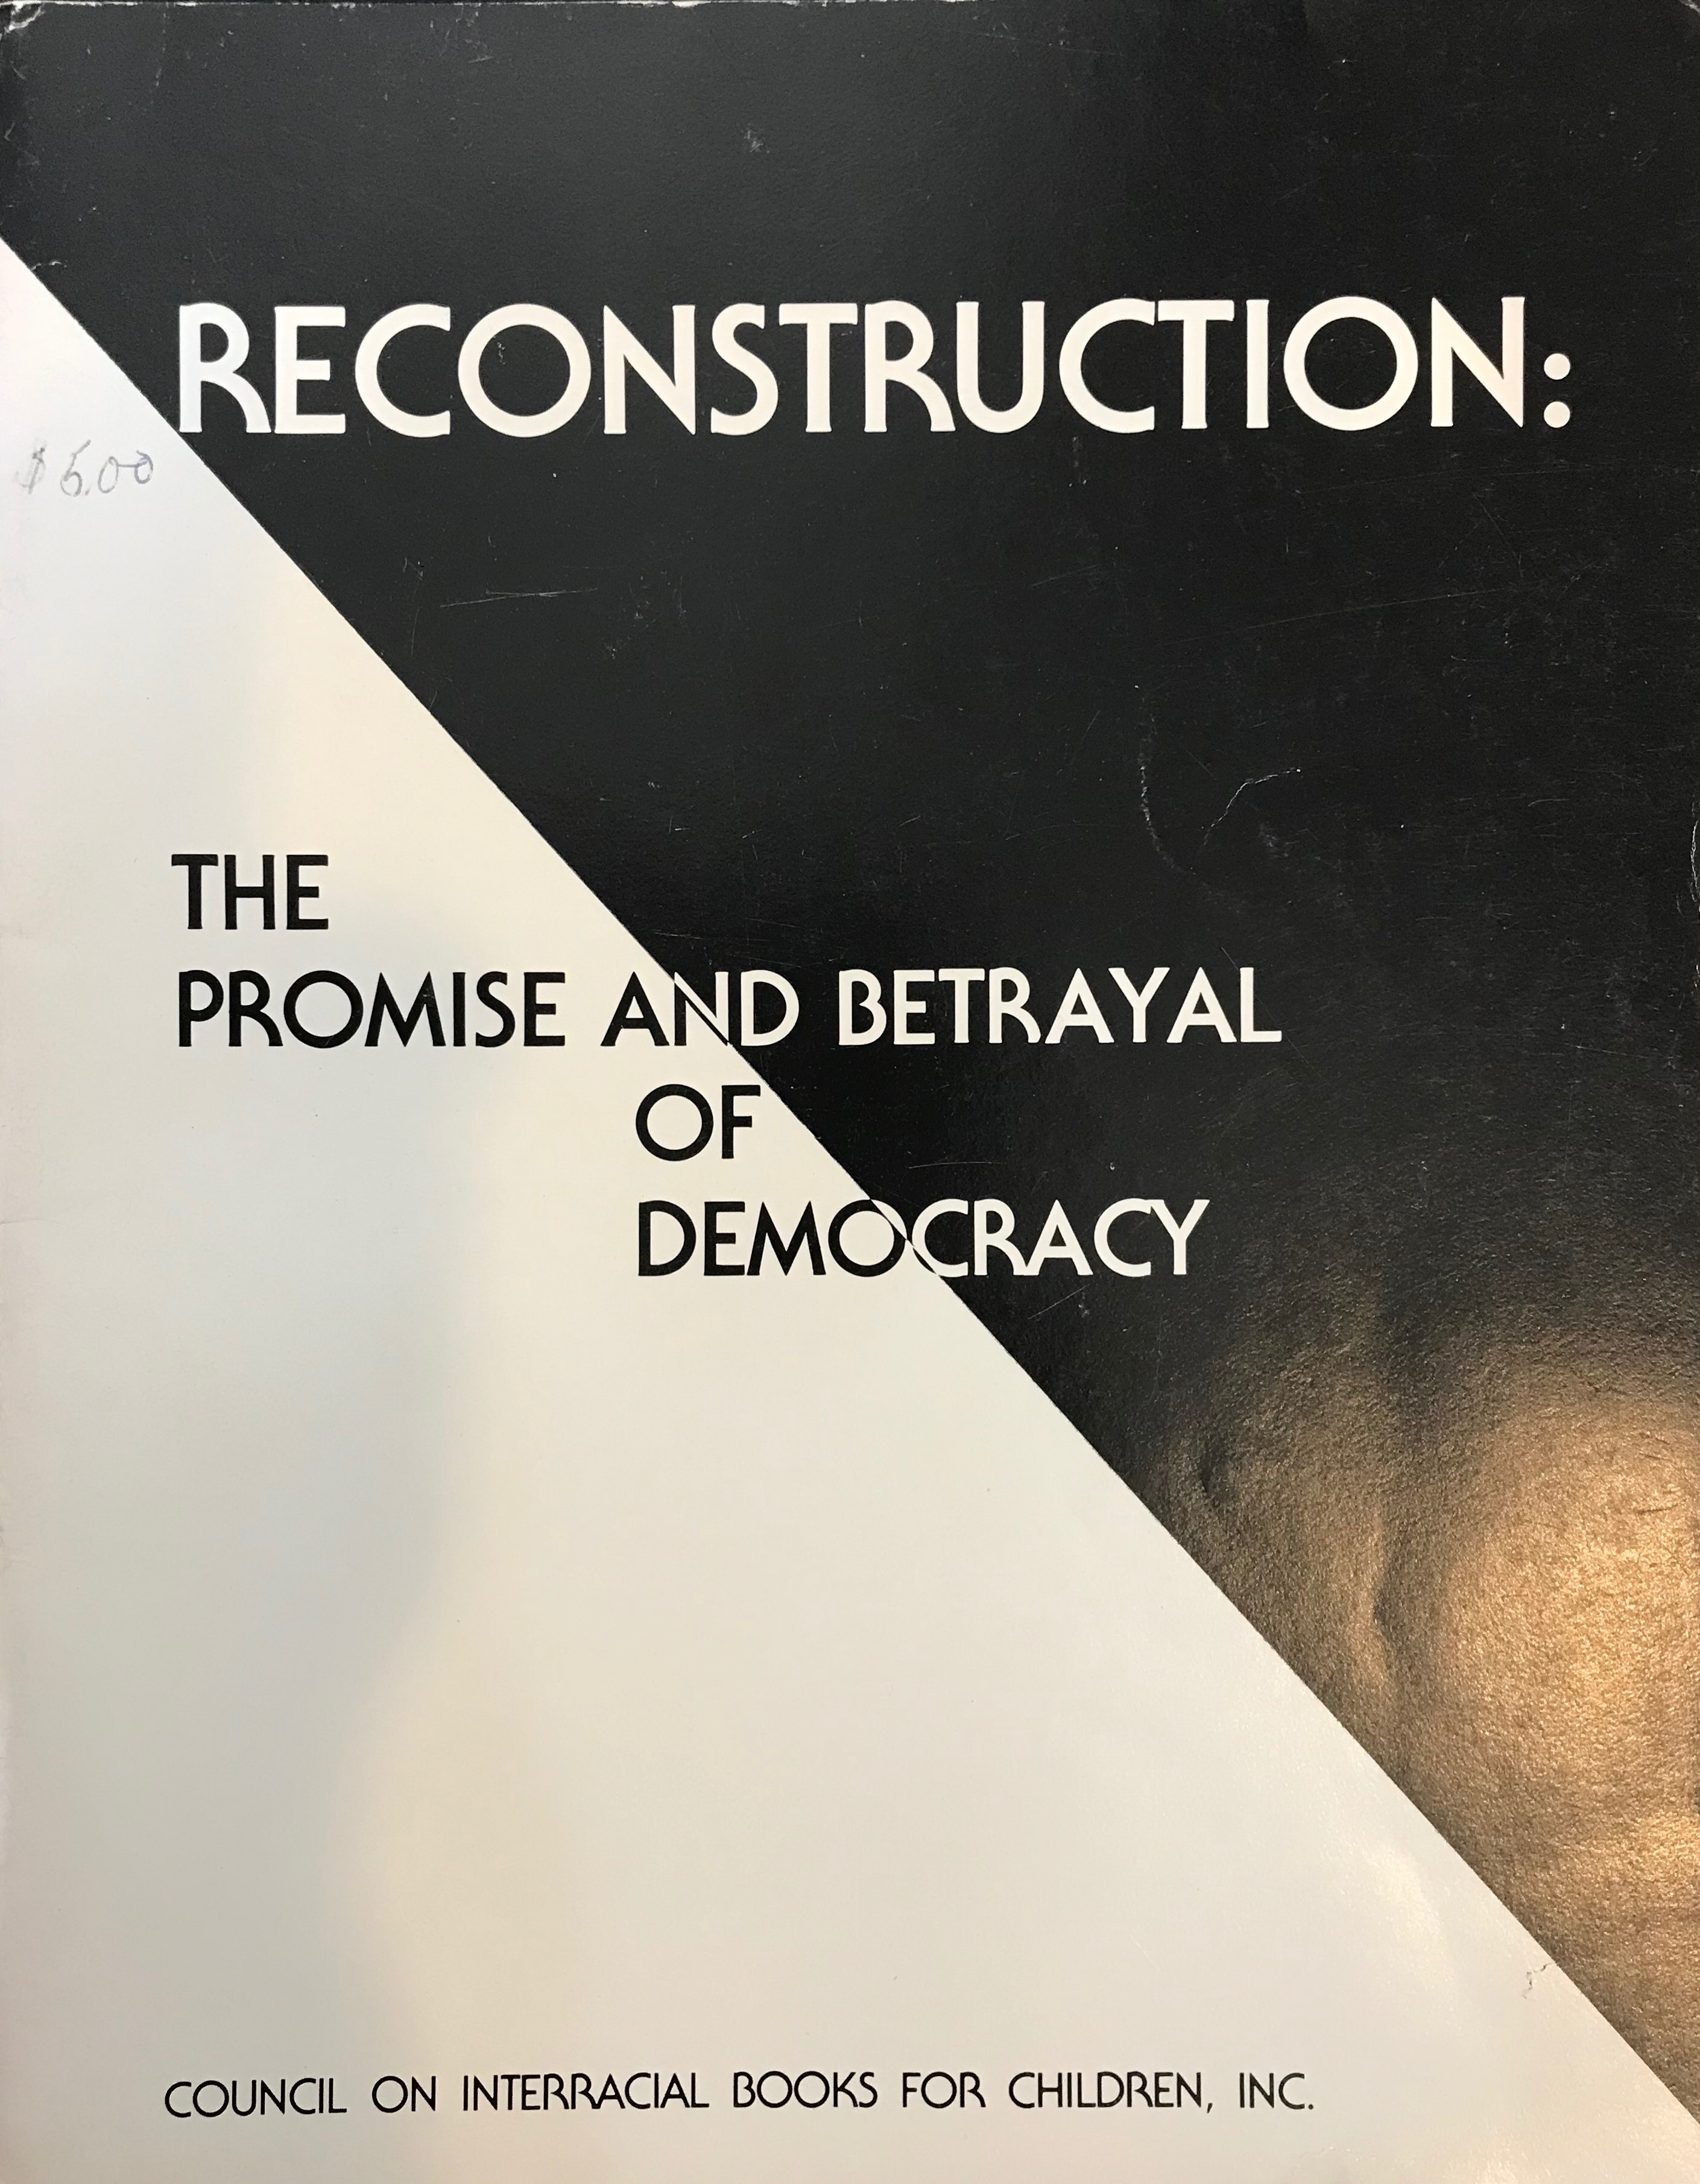 Reconstruction: The Promise and Betrayal of Democracy (Book Cover) | Zinn Education Project